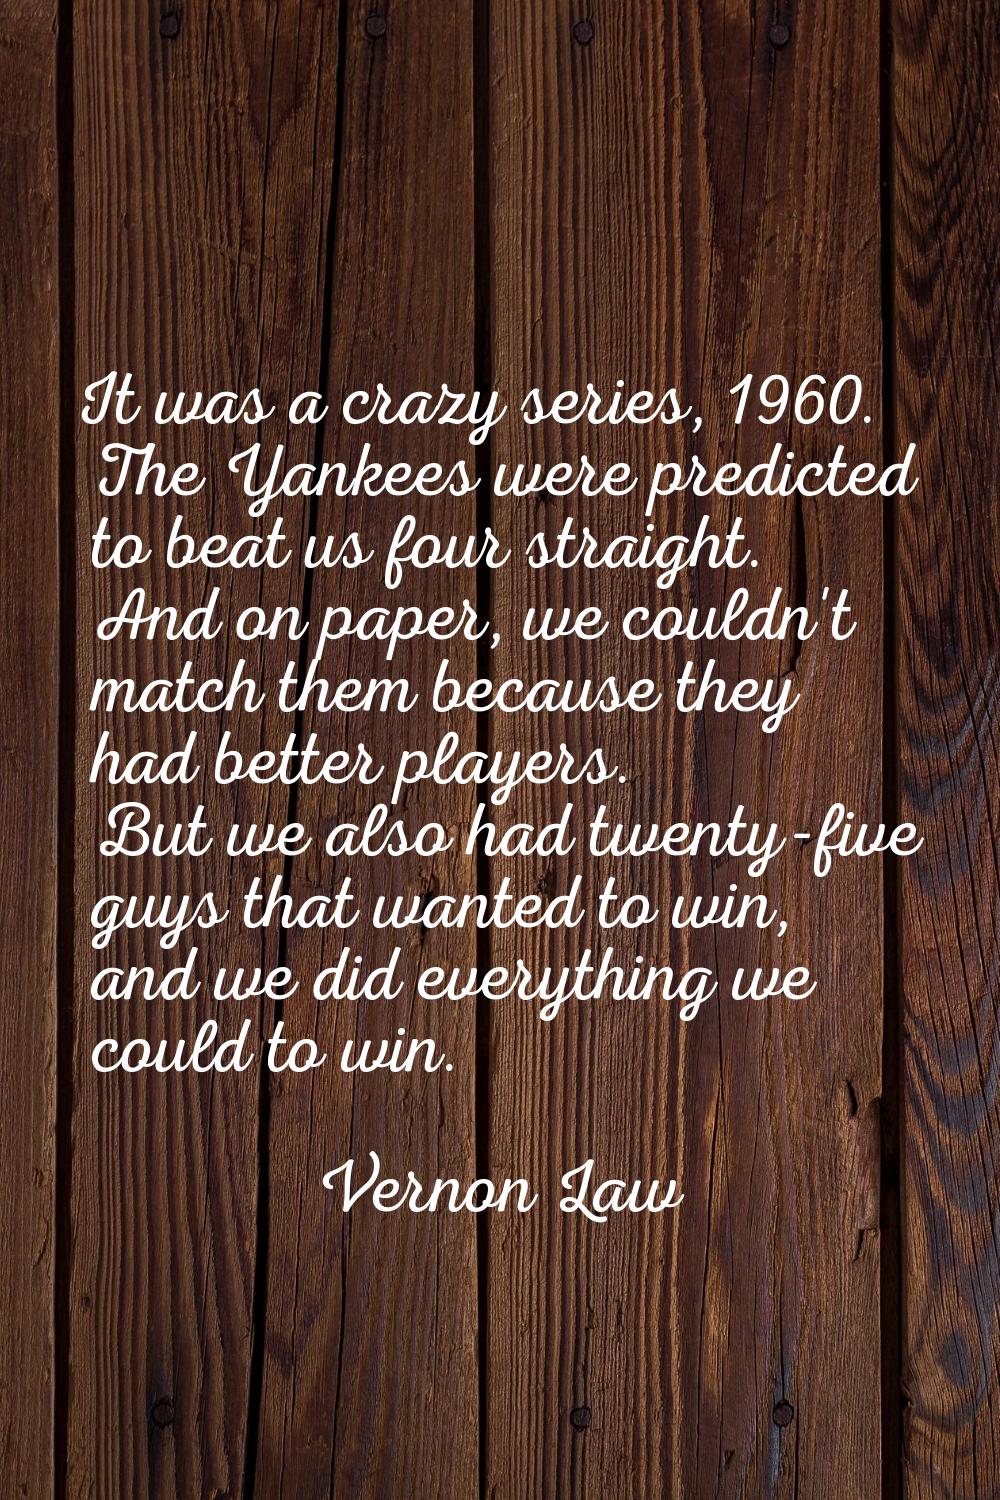 It was a crazy series, 1960. The Yankees were predicted to beat us four straight. And on paper, we 